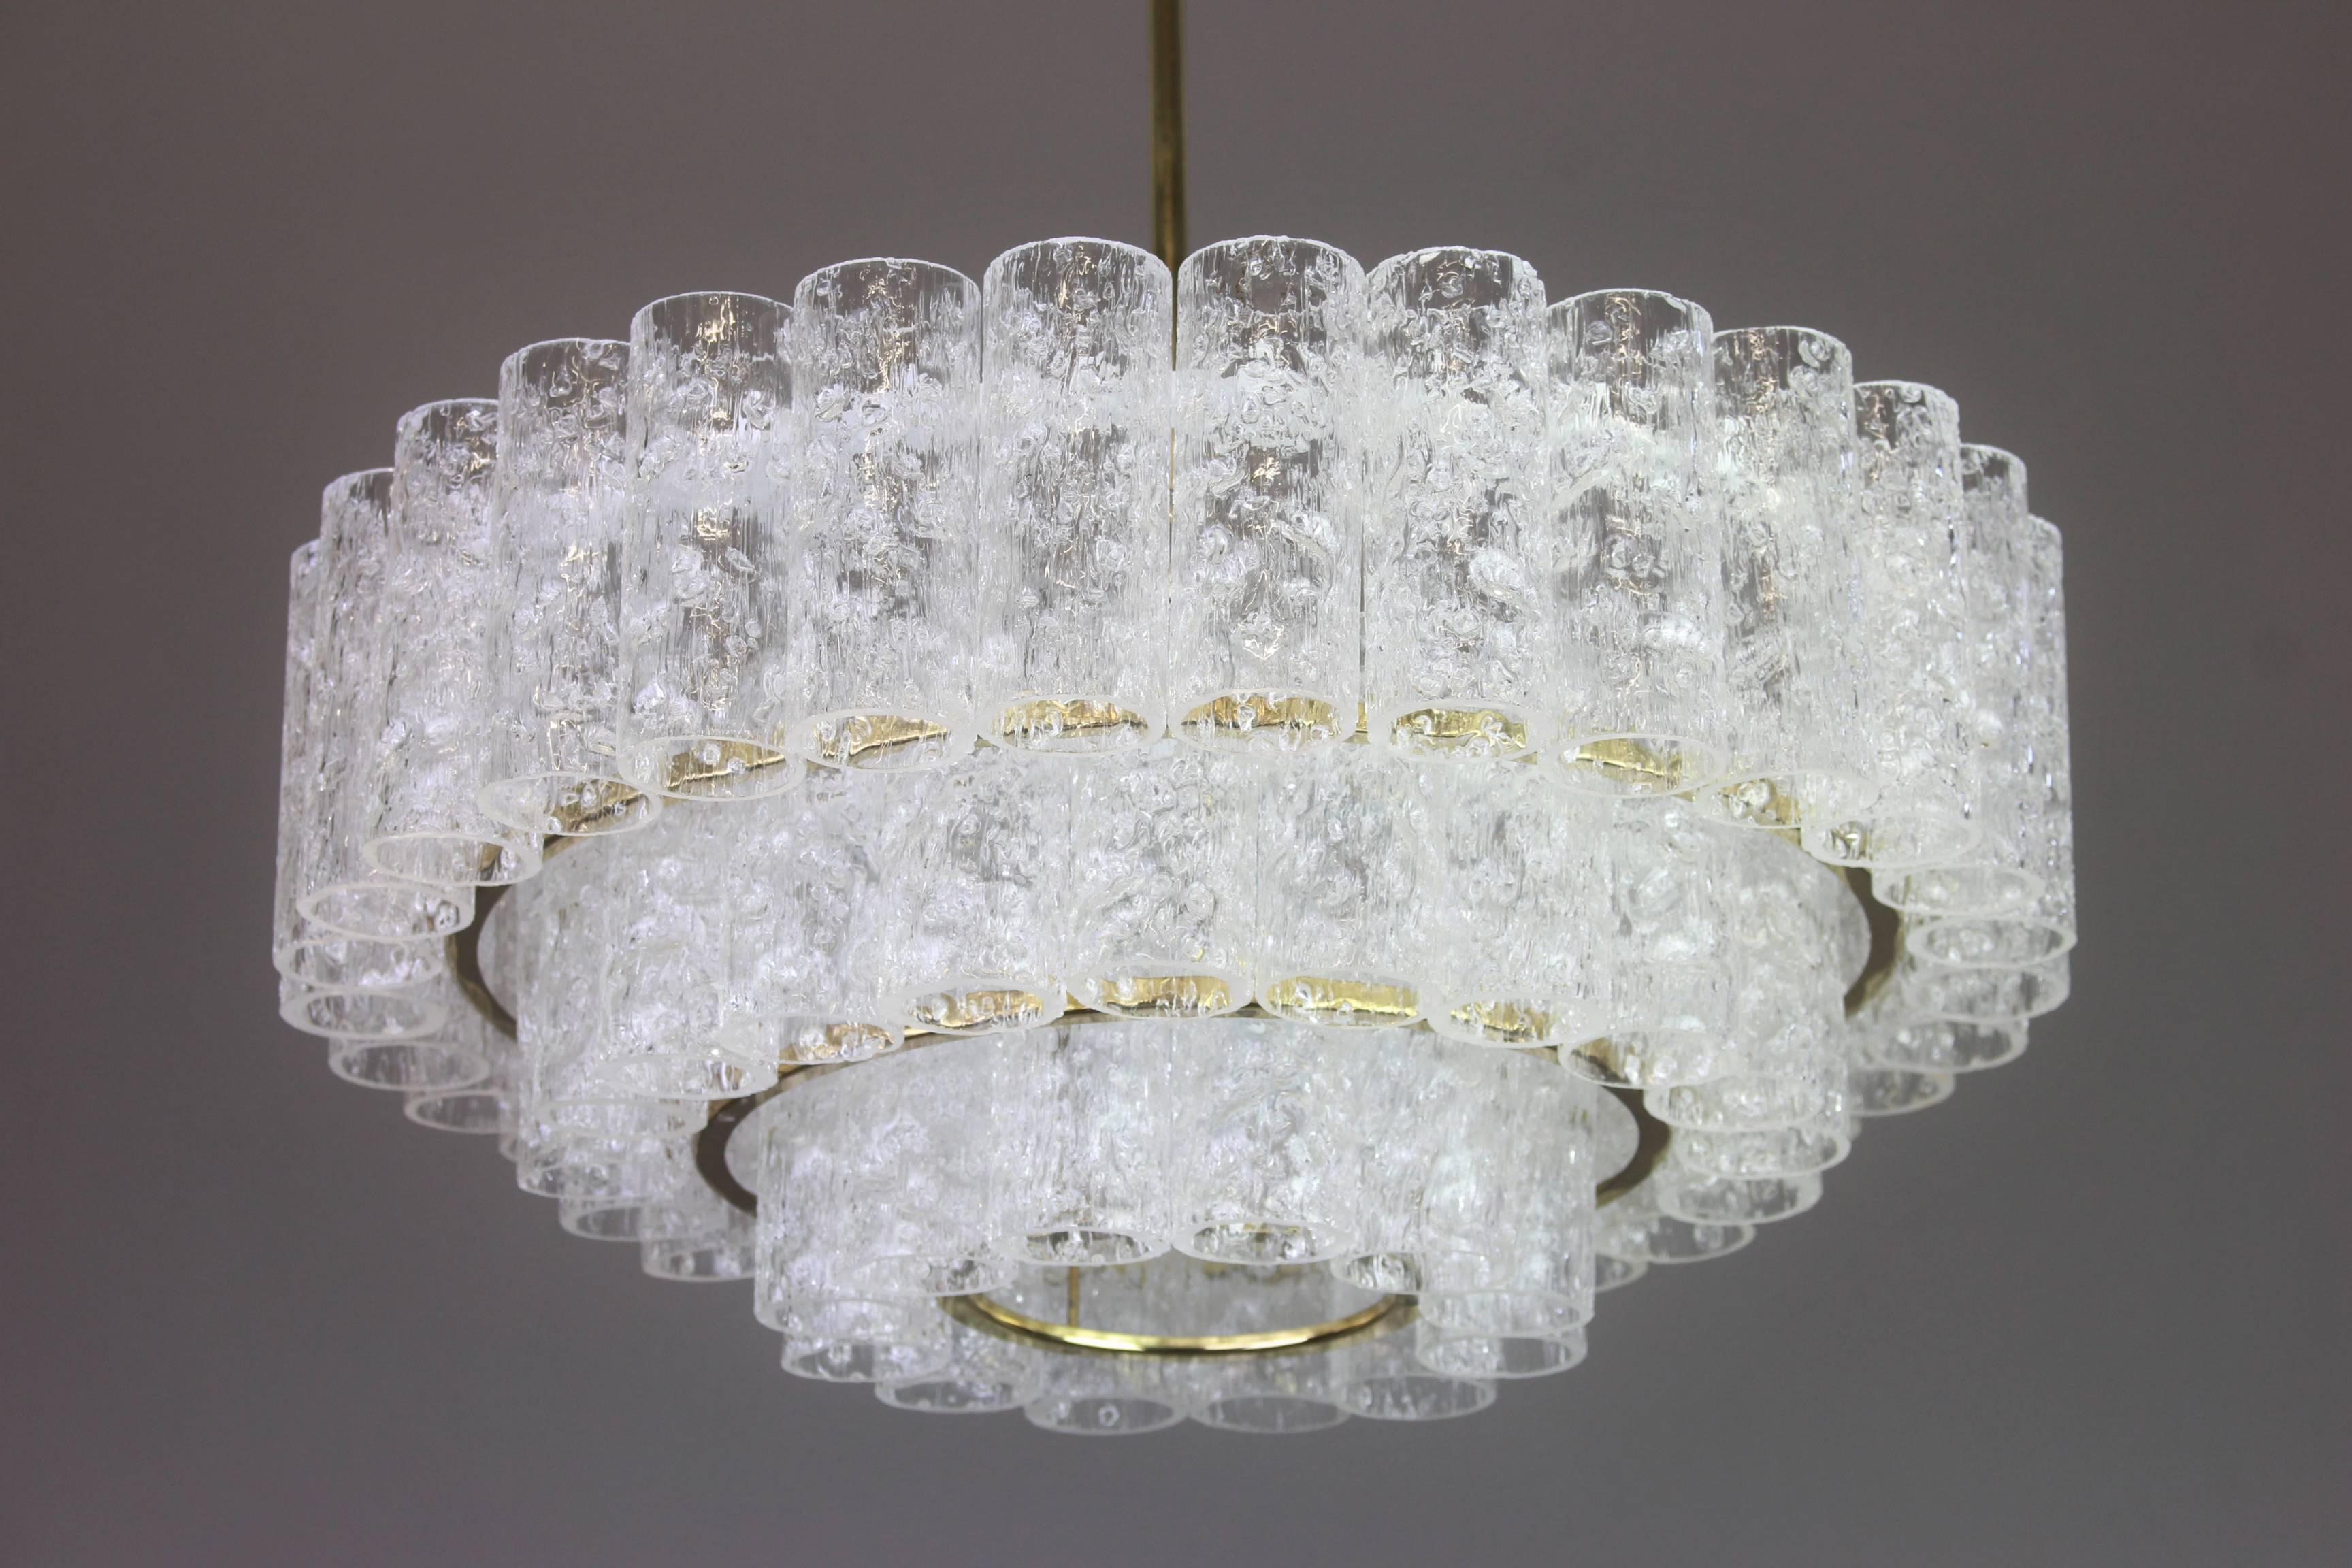 Fantastic three-tier midcentury chandelier by Doria, Germany, manufactured, circa 1960-1969. Three rings of Murano glass cylinders suspended from a fixture.
Heavy quality and in very good condition. Cleaned, well-wired and ready to use. 
The fixture